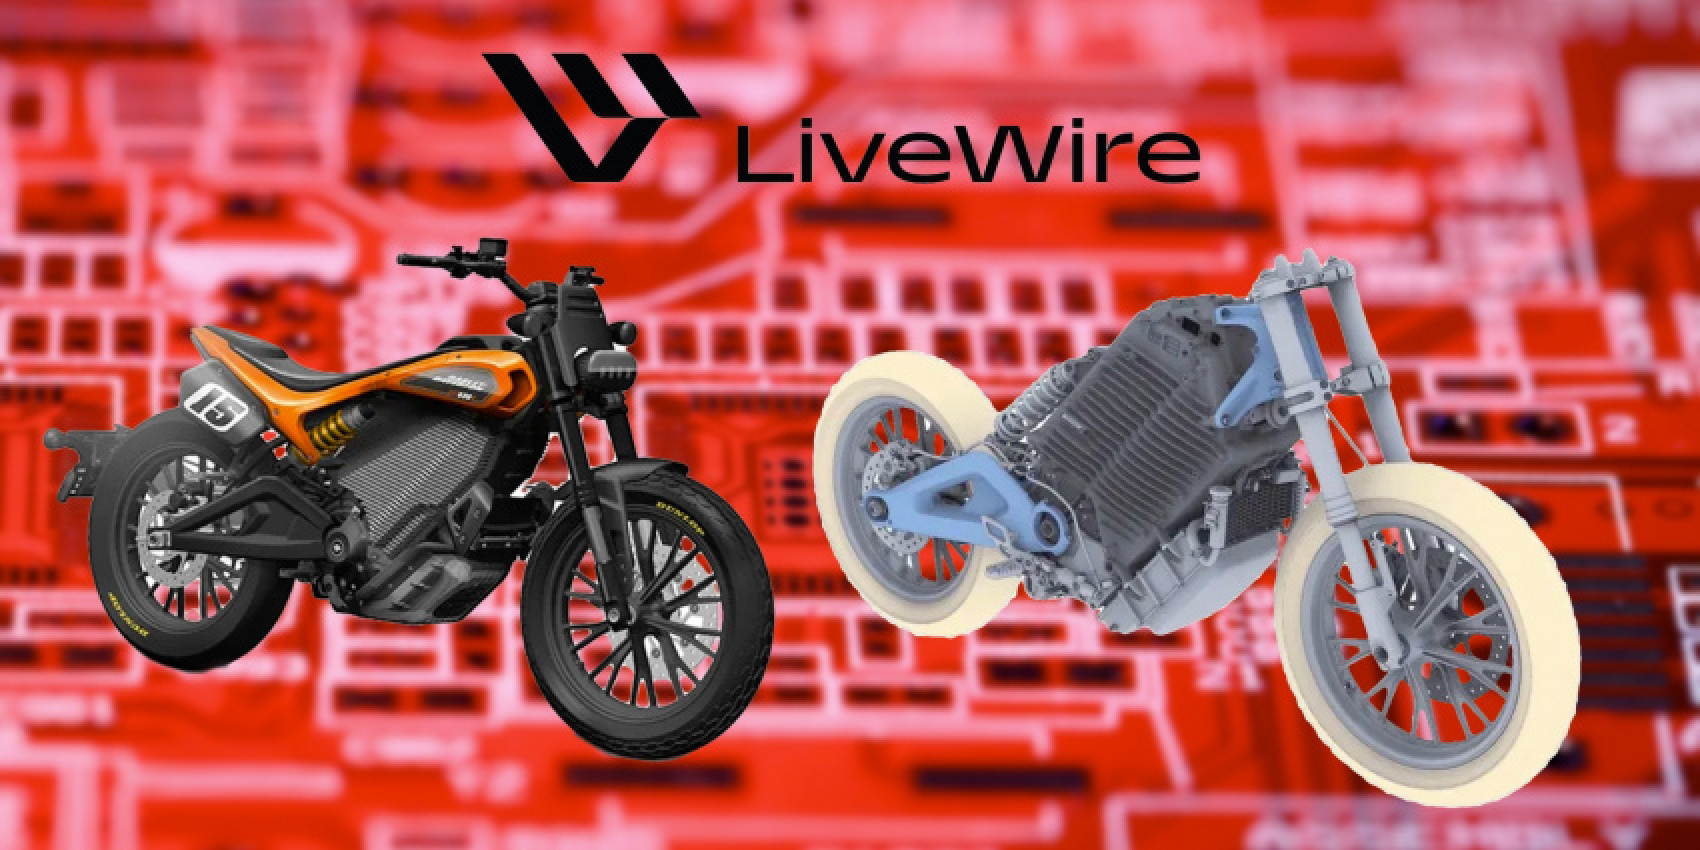 autos, cars, harley-davidson, harley, harley-davidson’s new lower-cost electric motorcycle coming in q2 under livewire sub-brand